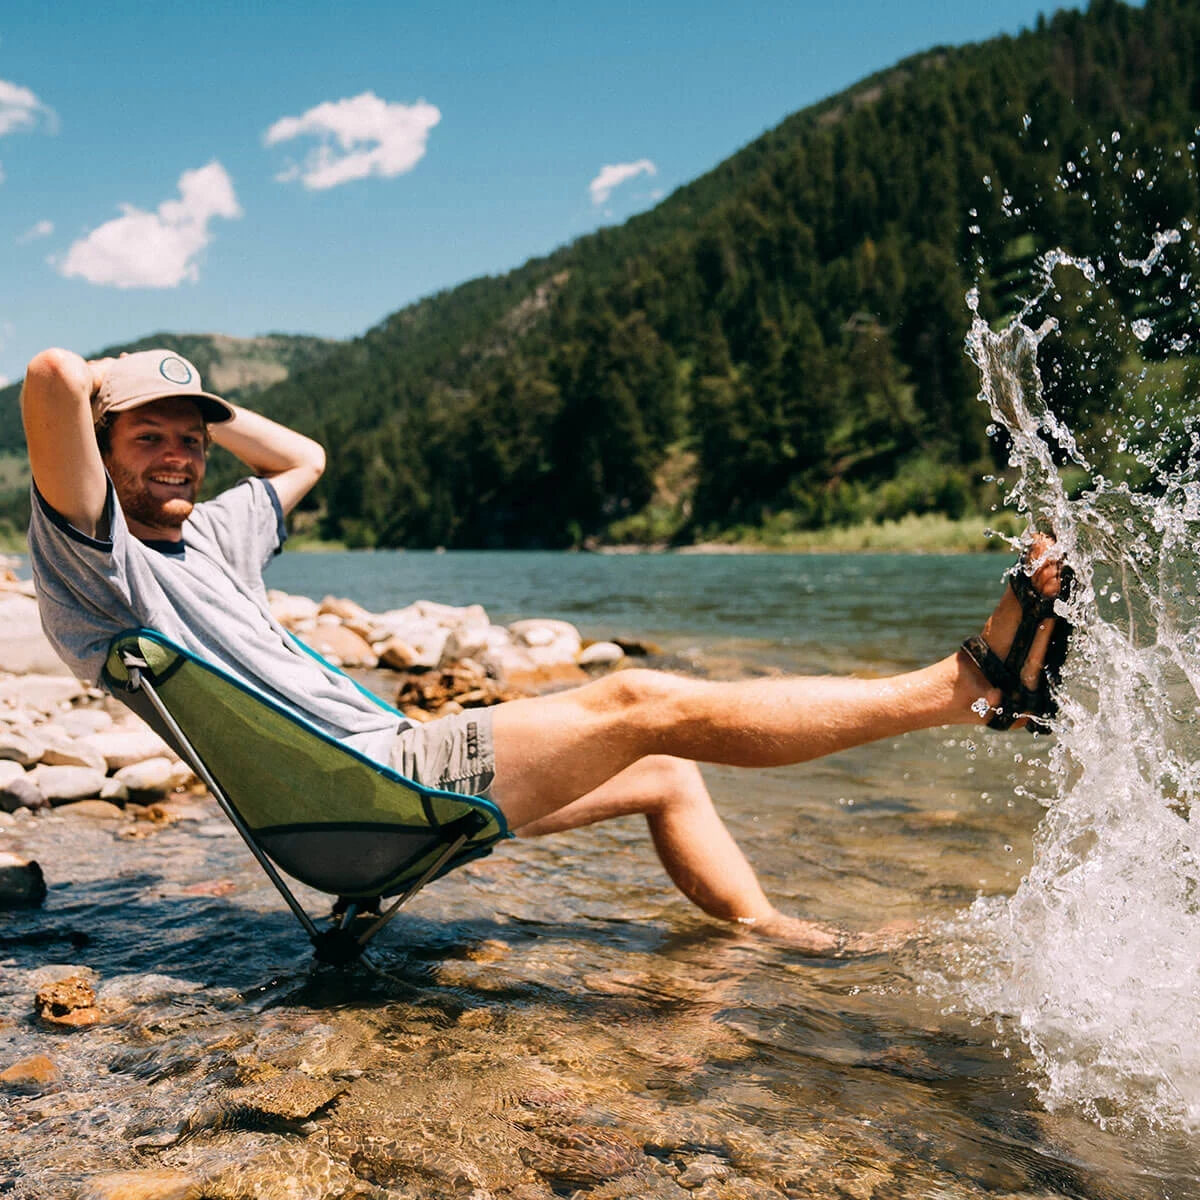 Kicking back in the Eureka! Tagalong Lite Camp Chair